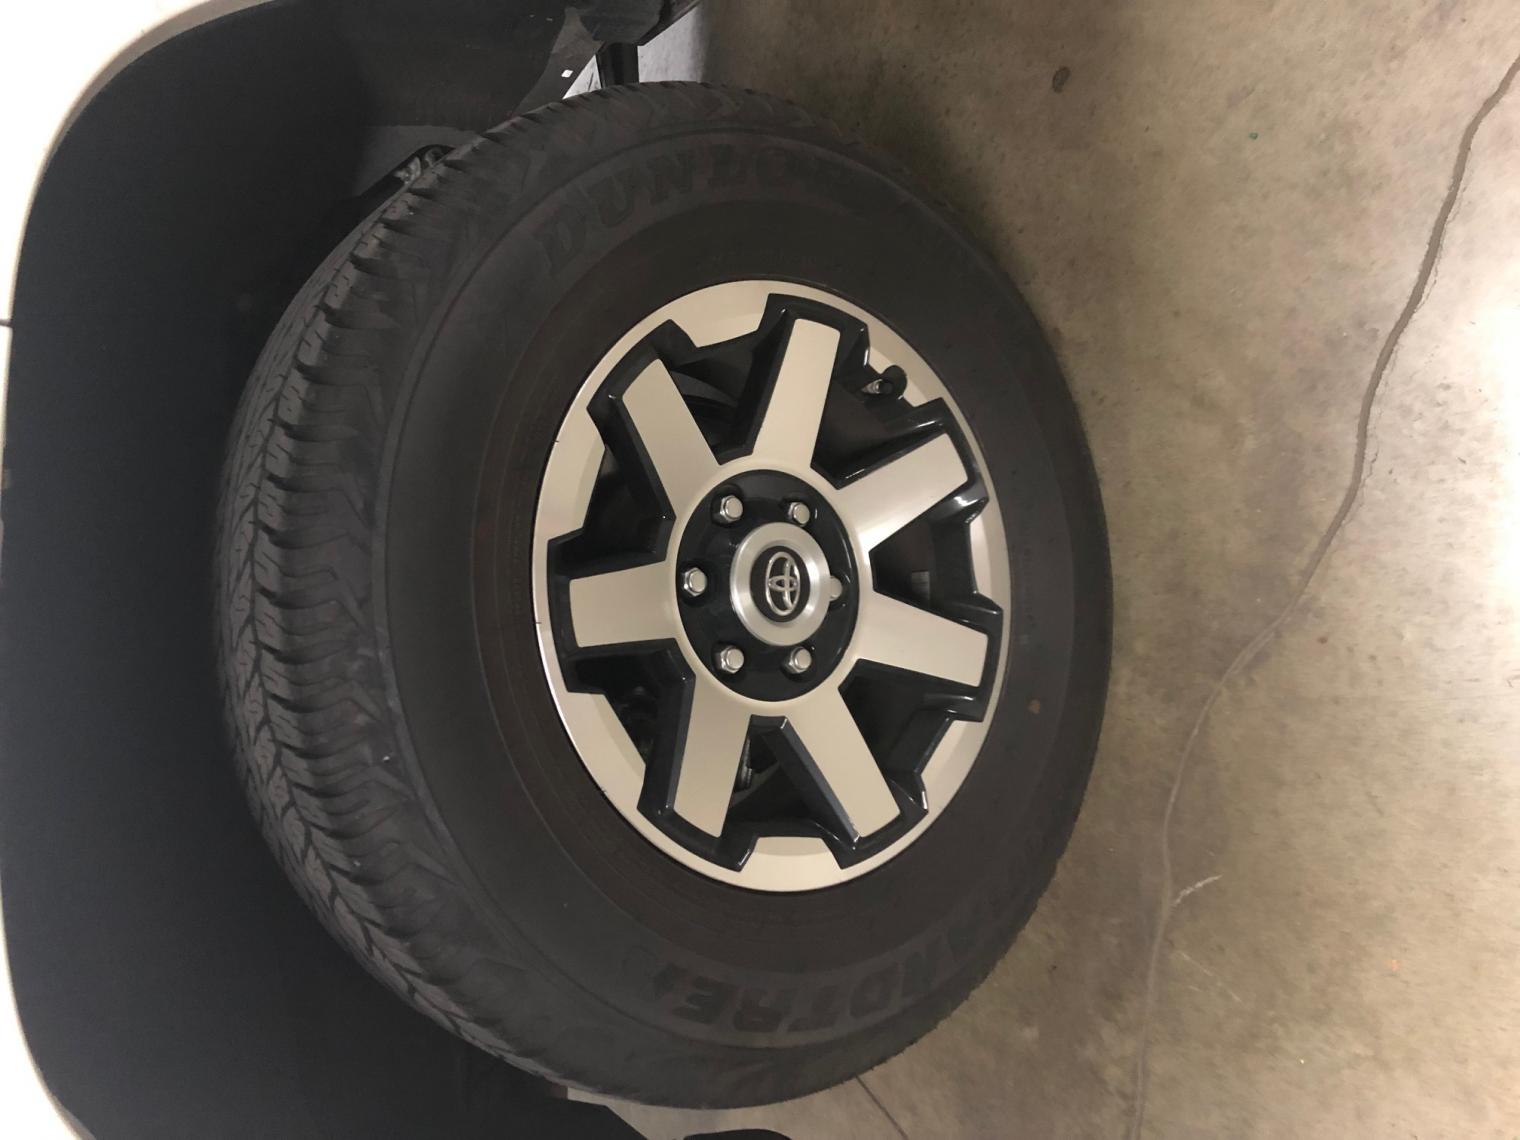 For Sale: 2019 TRD Off Road Premium Wheels and Tires - 0 (Chicago, IL)-img_1963-jpg